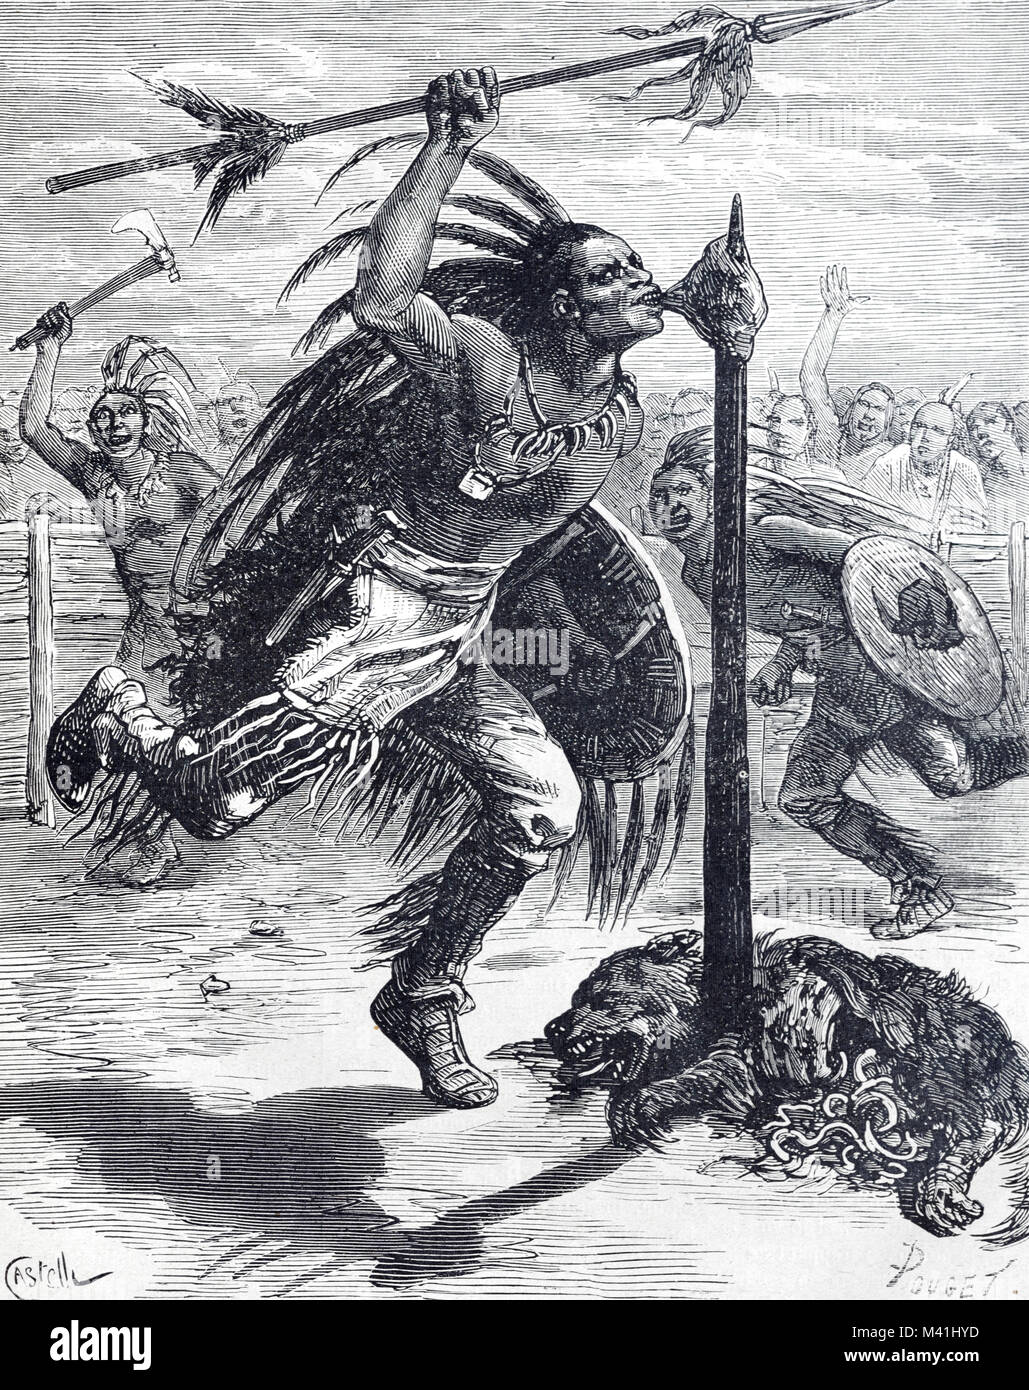 Dog Sacrifice and Tribal Dance Among the Flathead People, aka Bitterroot Salish, in Flathead Reservation of the Flathead Nation of Montana, United States. The Native American Salish man dances around the sacrificed dog and periodically bites the dog's skewered liver in a strength giving or war-like ritual. (Engraving 1879) Stock Photo